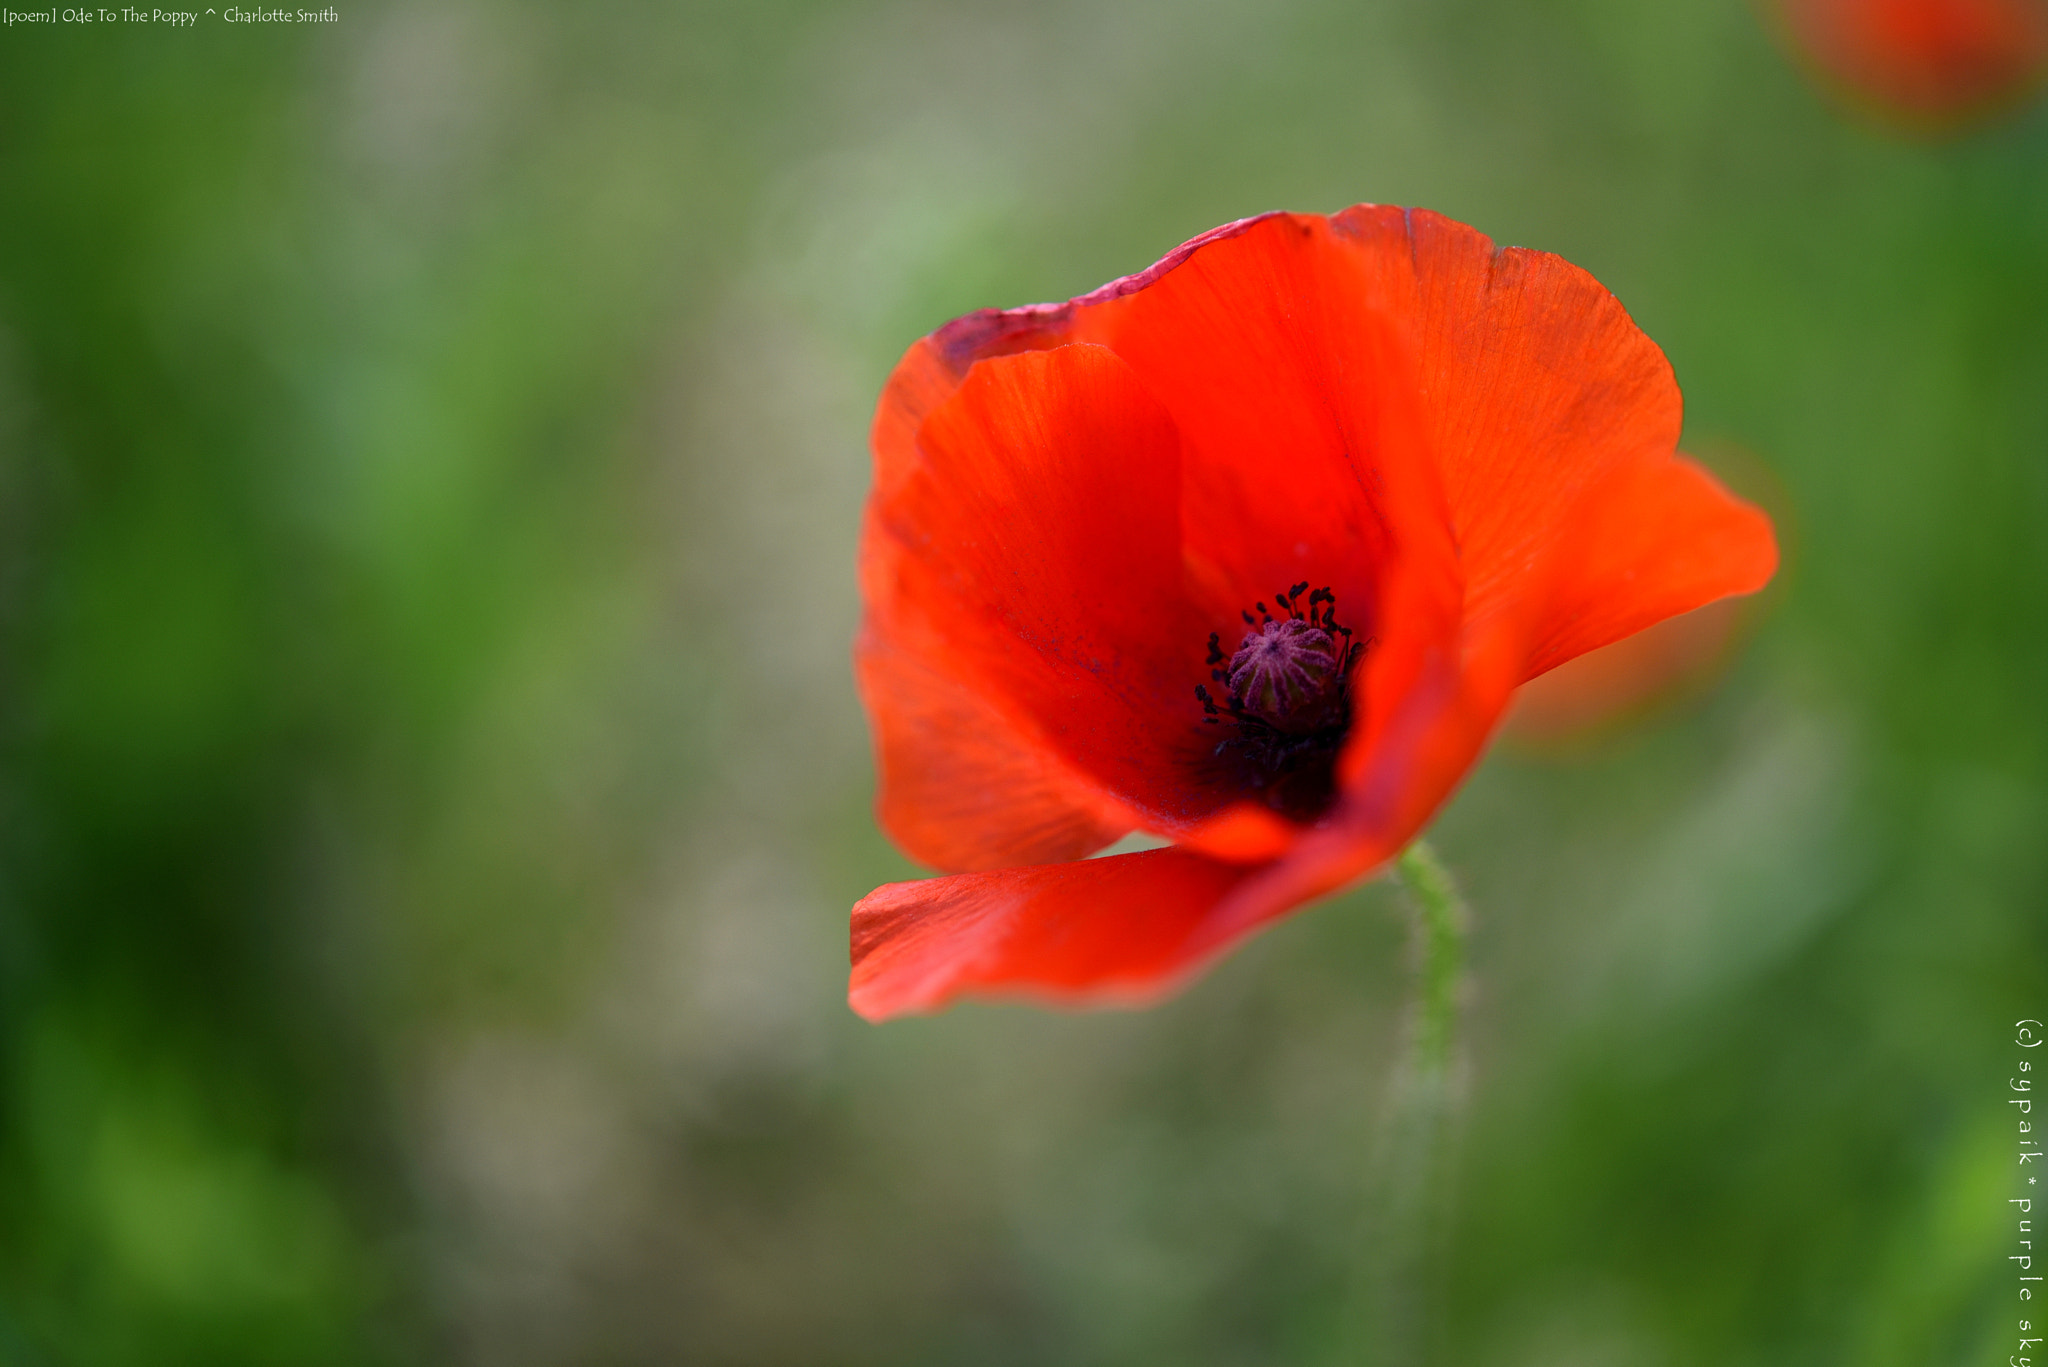 Nikon D750 sample photo. Ode to the poppy ** photography